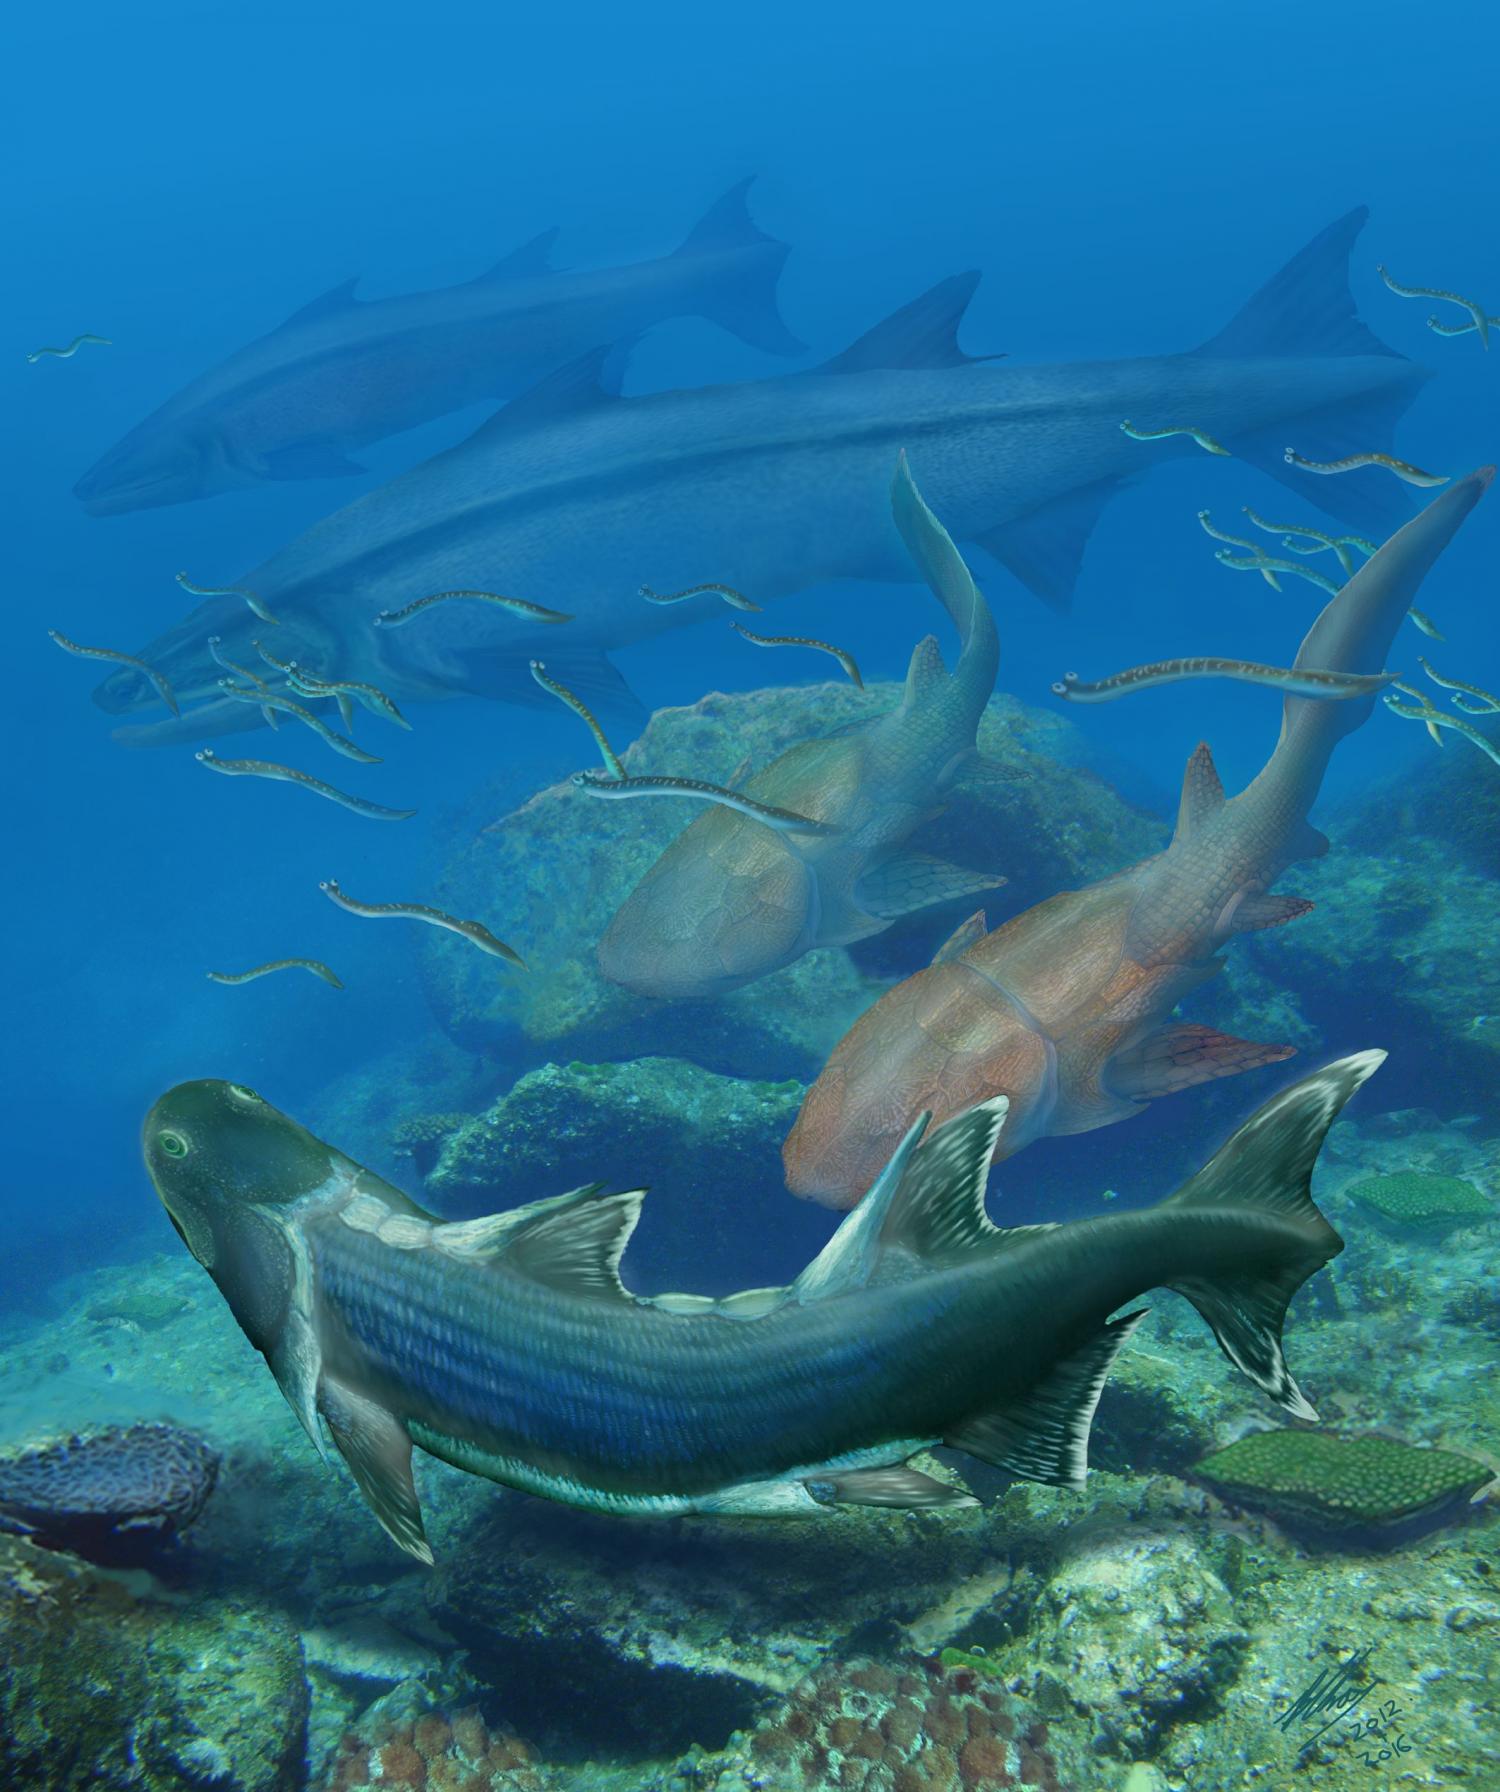 Ancient southern China fish may have evolved prior to the 'Age of Fish'